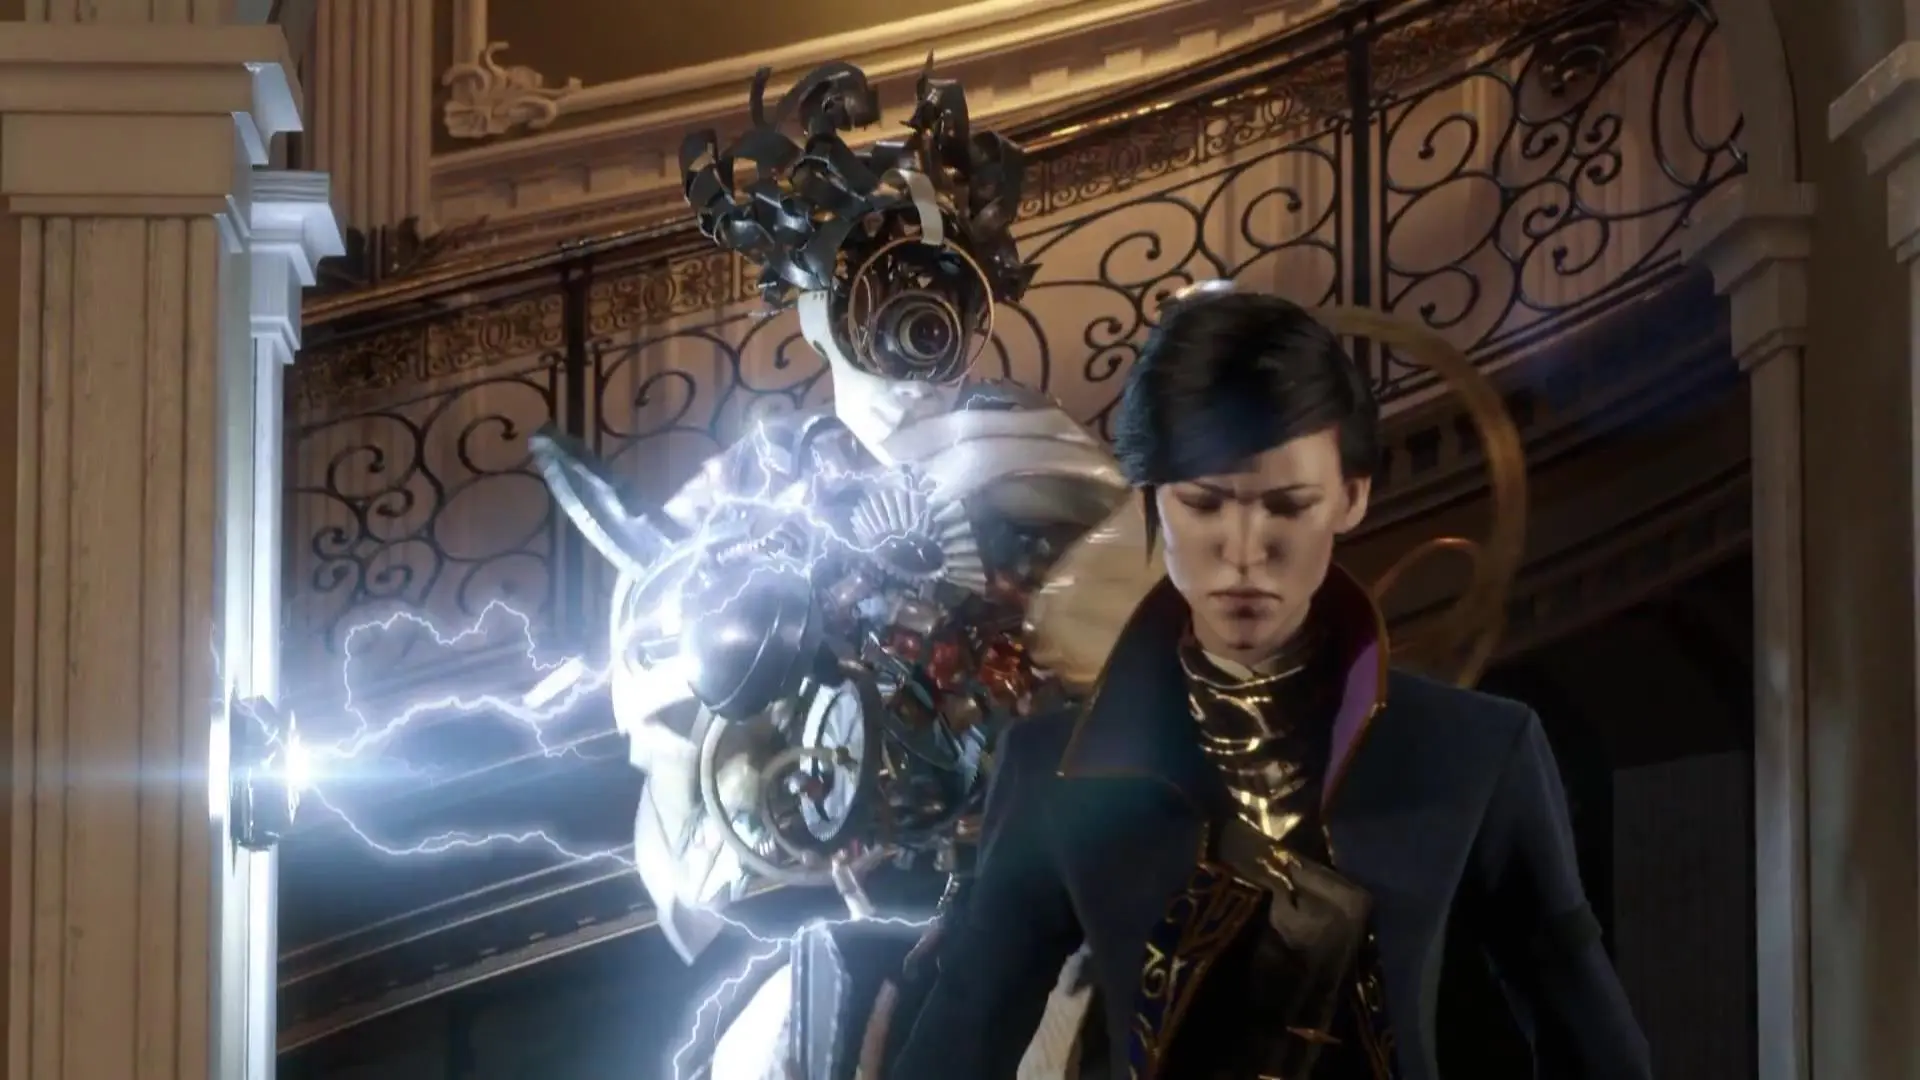 New Dishonored 2 gameplay is the world's most confusing house